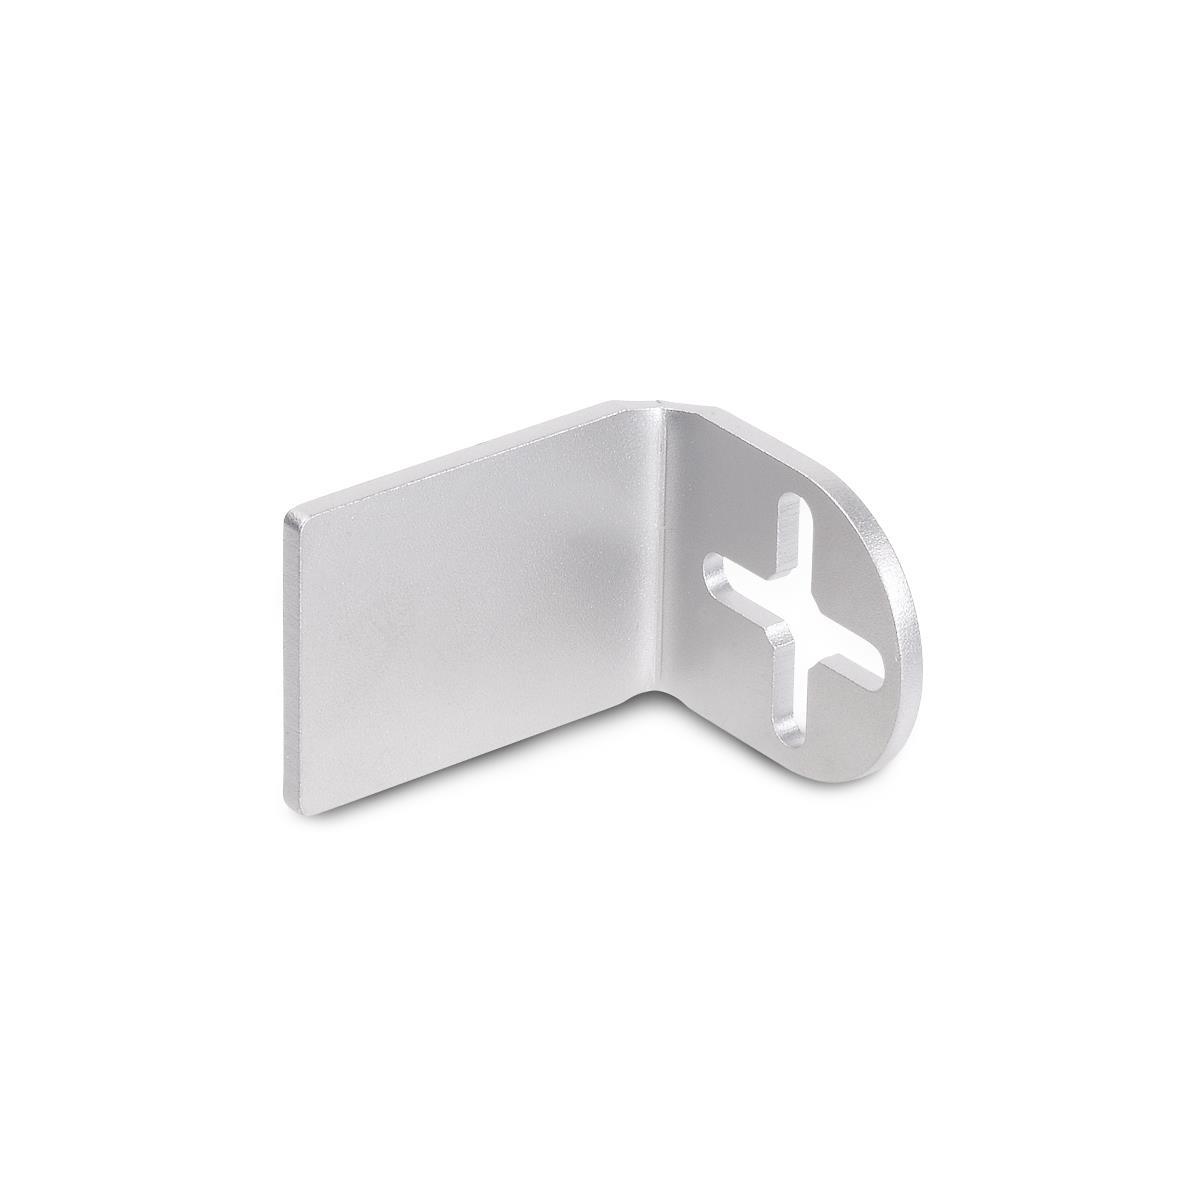 GN 479.1 Stainless Steel Mounting Brackets, L-Shaped, for Attachment Mounting Clamps GN 478 / GN 484 